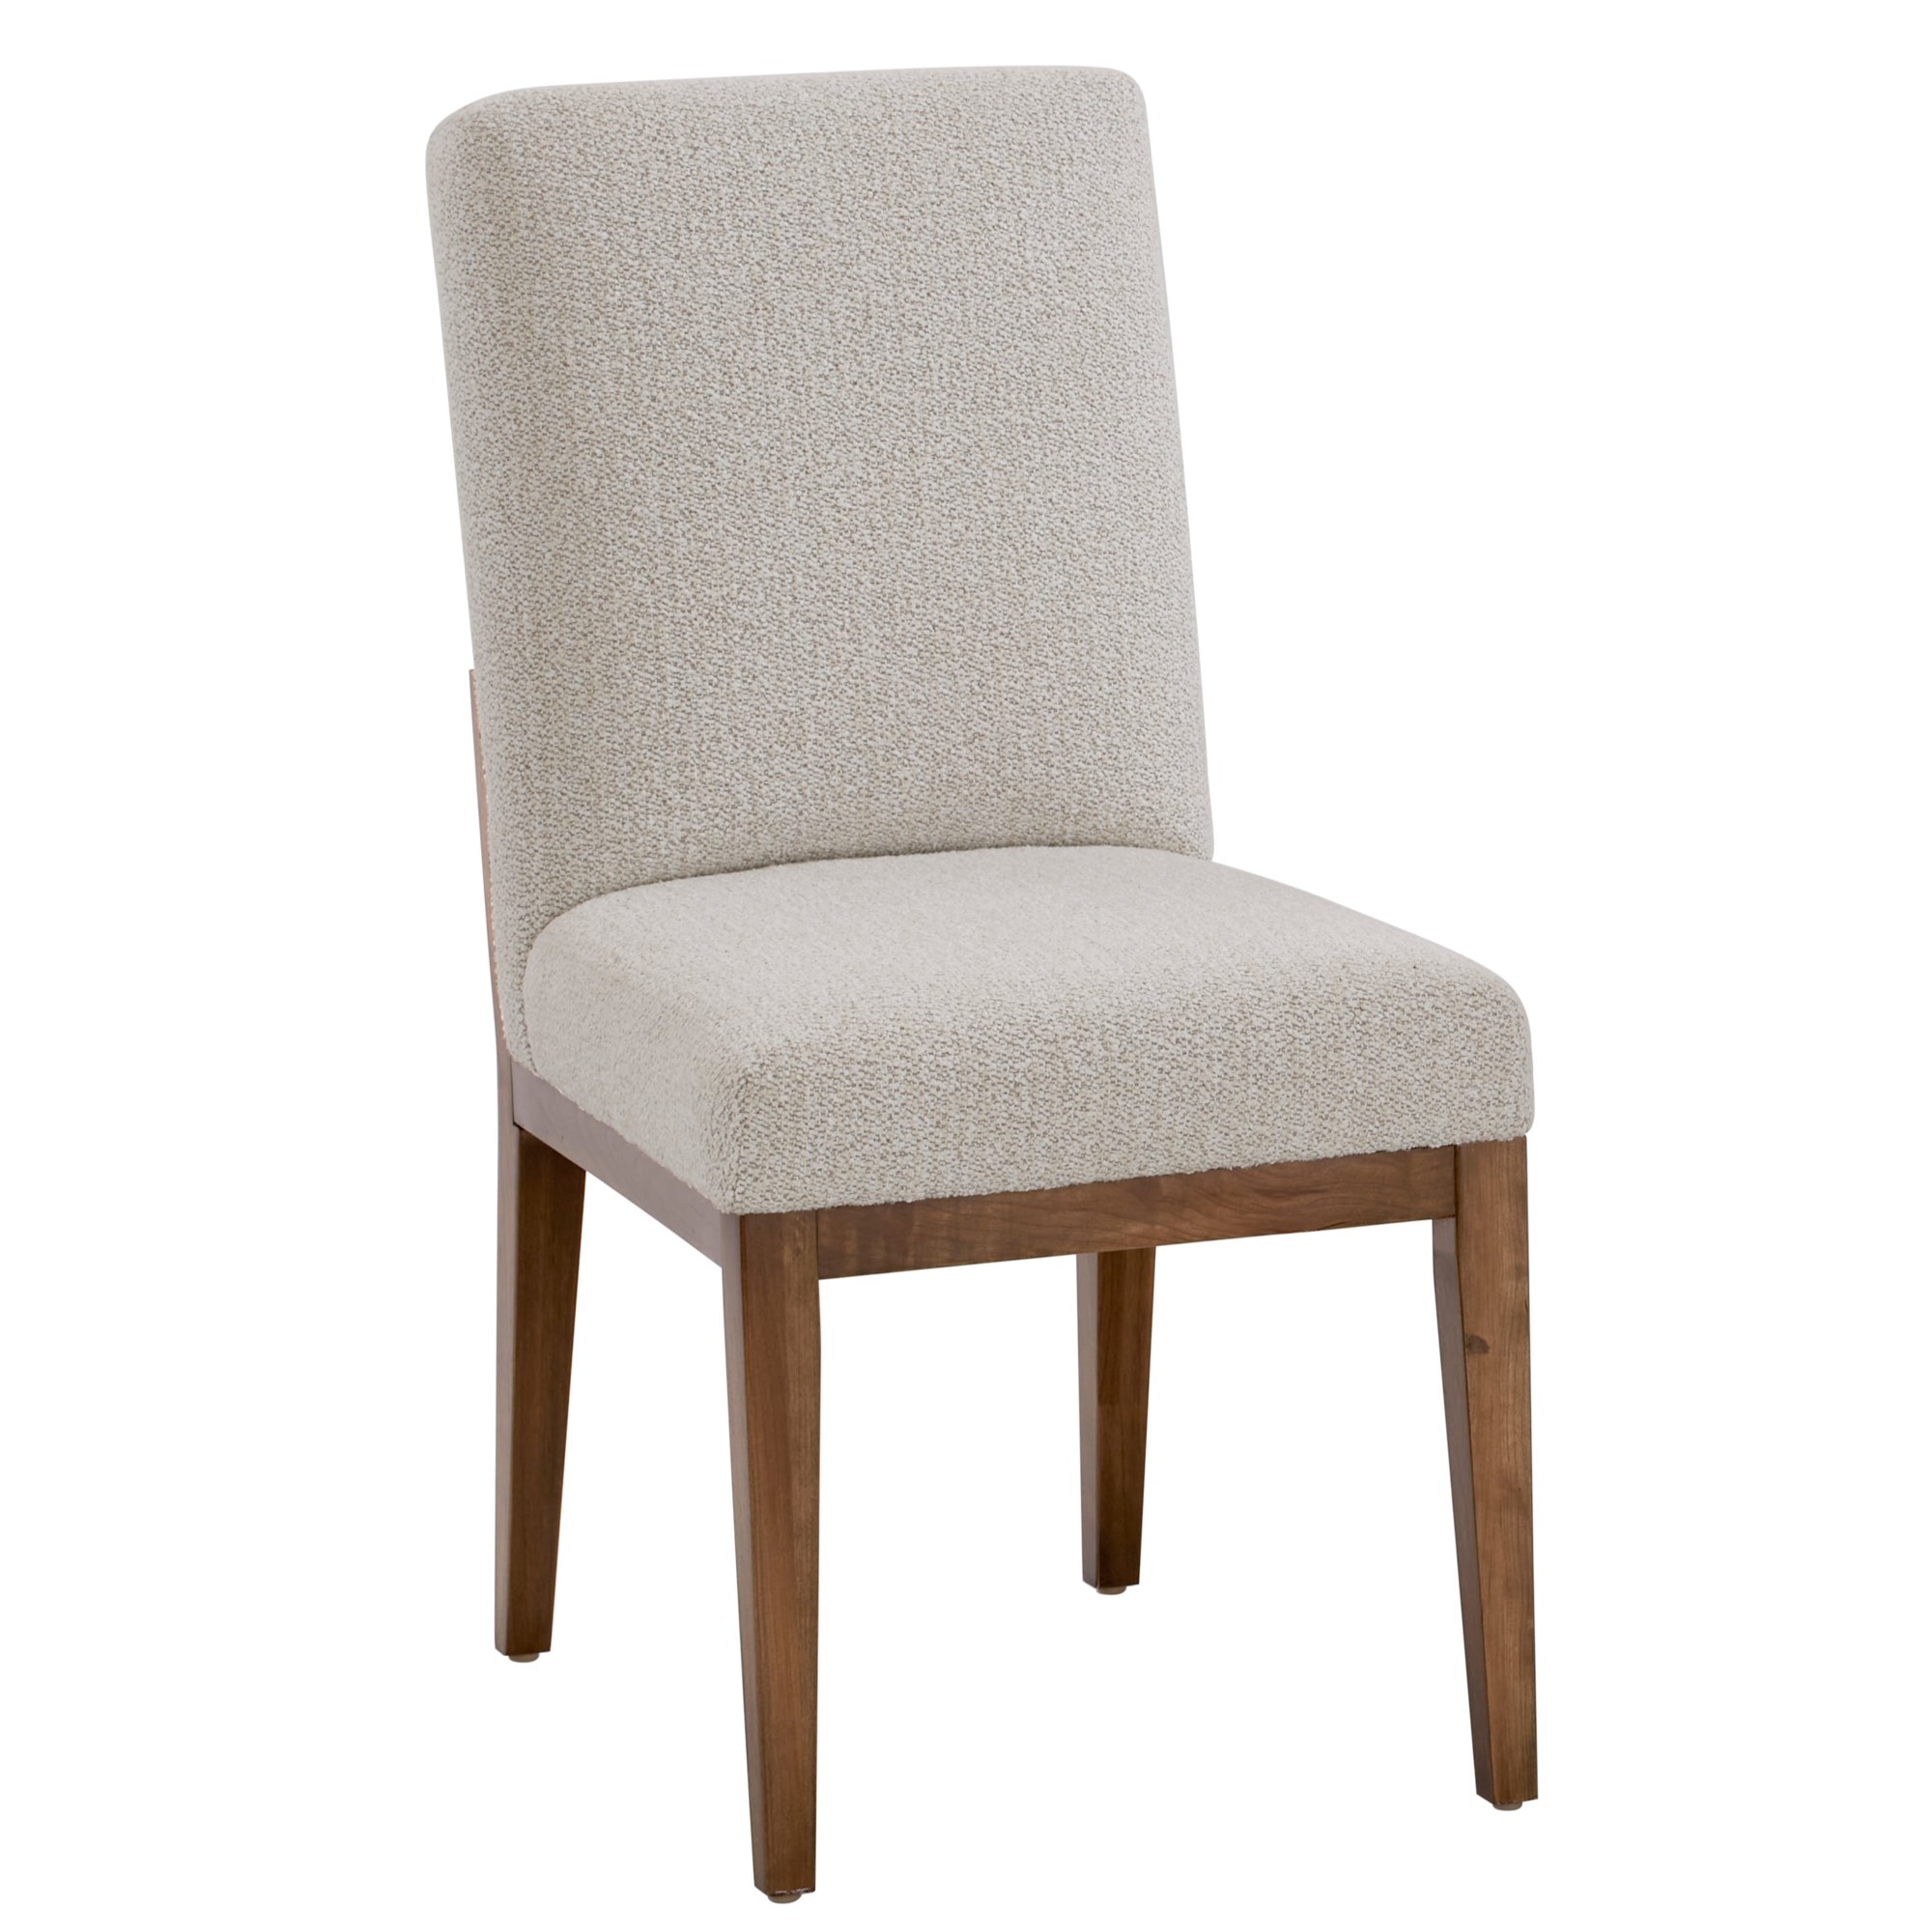 Vaughan Bassett Crafted Brown Cherry Chair Chair Dining - Medium | Upholstered 151-030B Dining Squirrel | - Contemporary Side Side Chairs Furniture